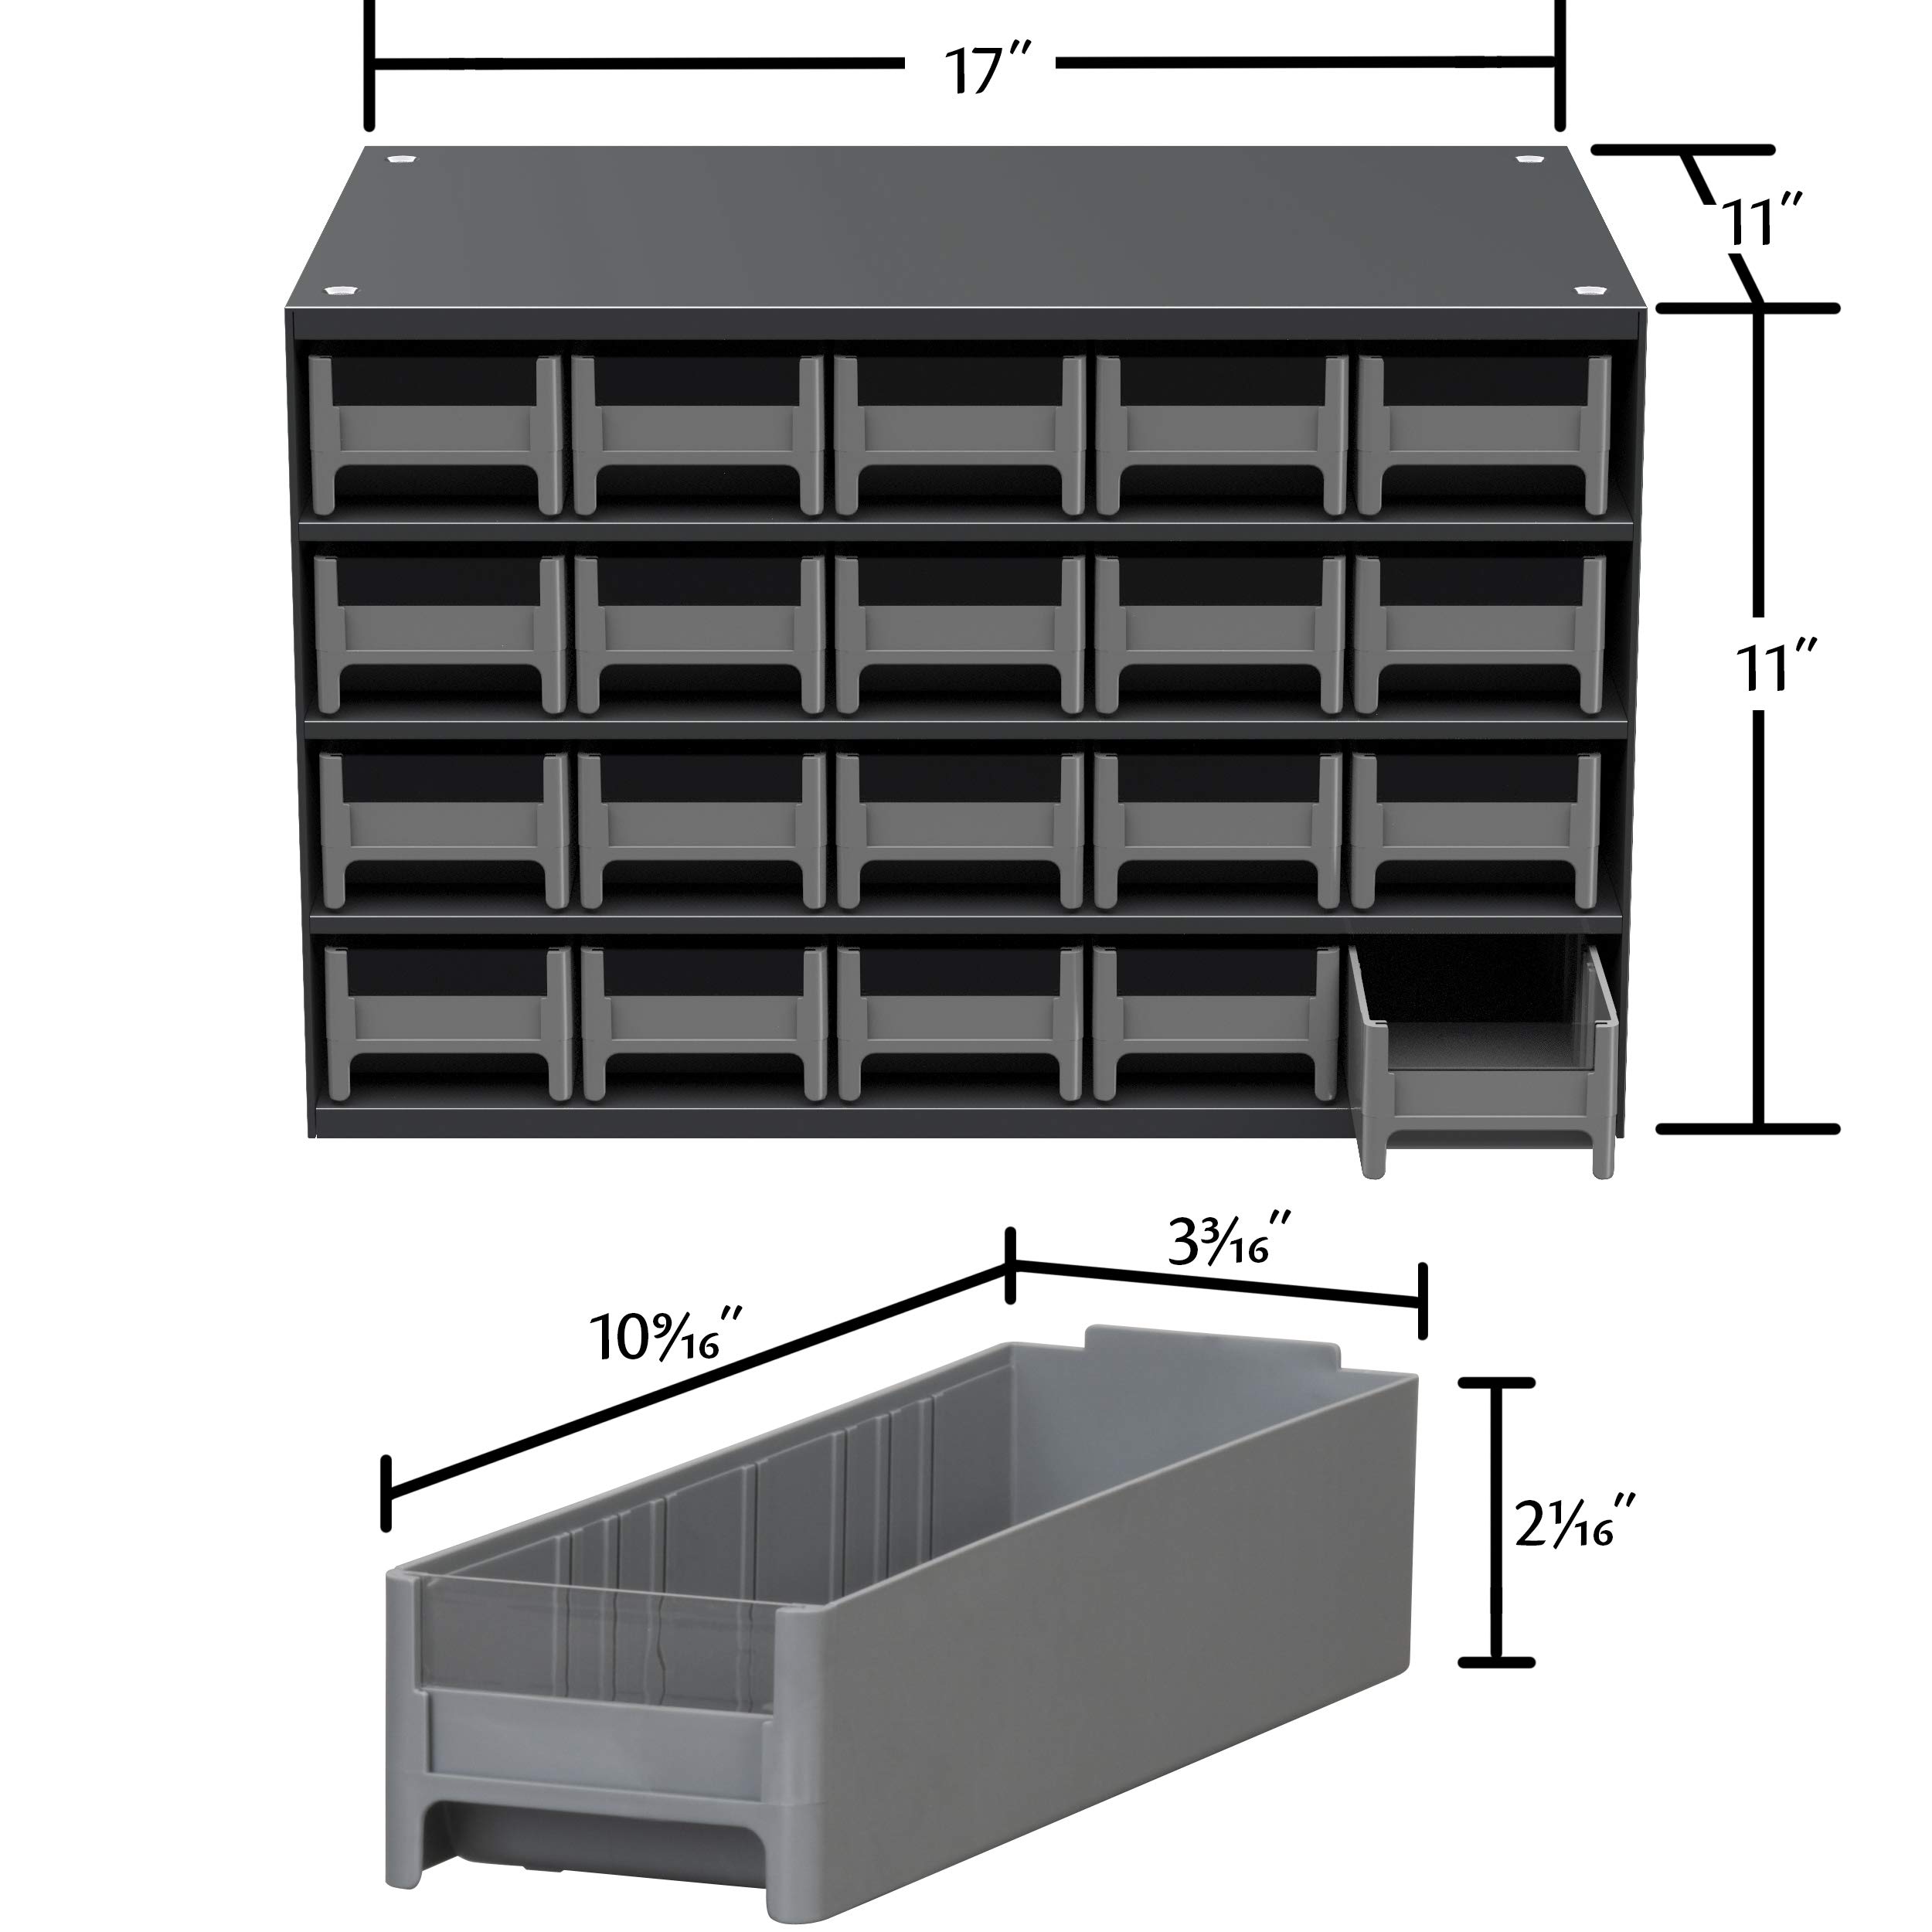 Akro-Mils 19320 Steel Parts Garage Storage Cabinet Organizer for Small Hardware, Nails, Screws, Bolts, Nuts, and More, 17-Inch W x 11-Inch D x 11-Inch H, 20-Drawer, Gray Cabinet/Gray Drawers